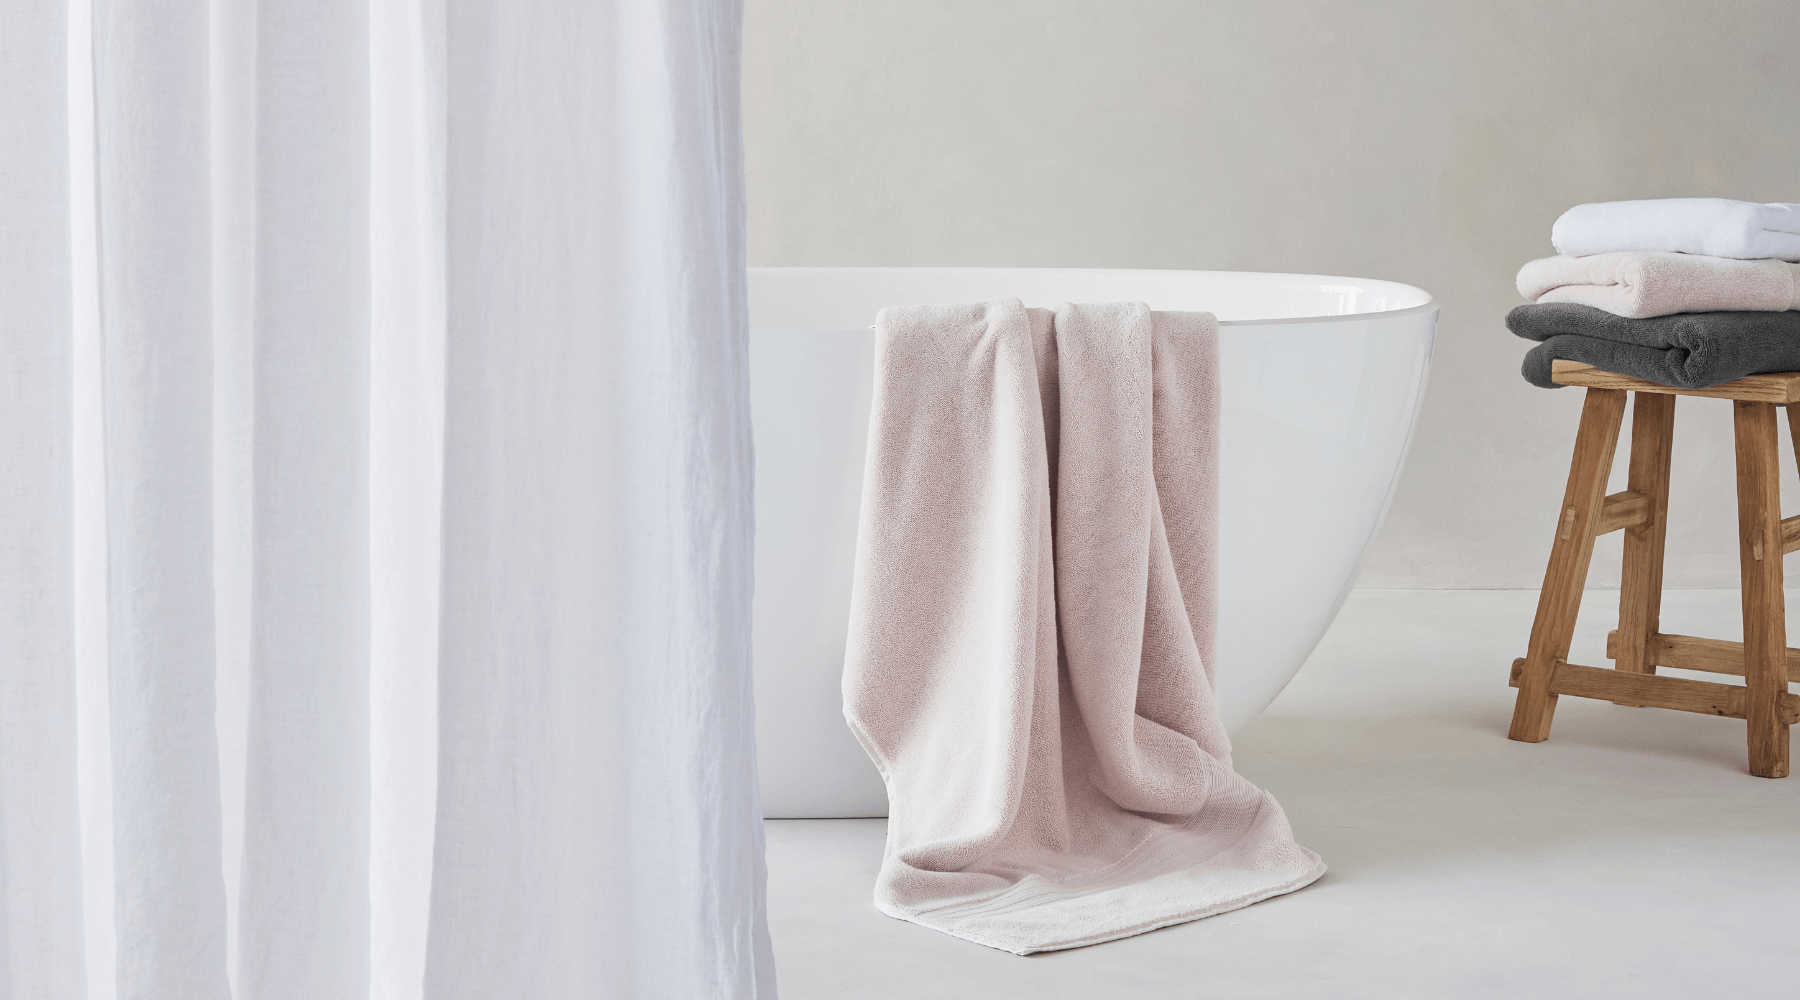 Behind The Design | Towels & Robes